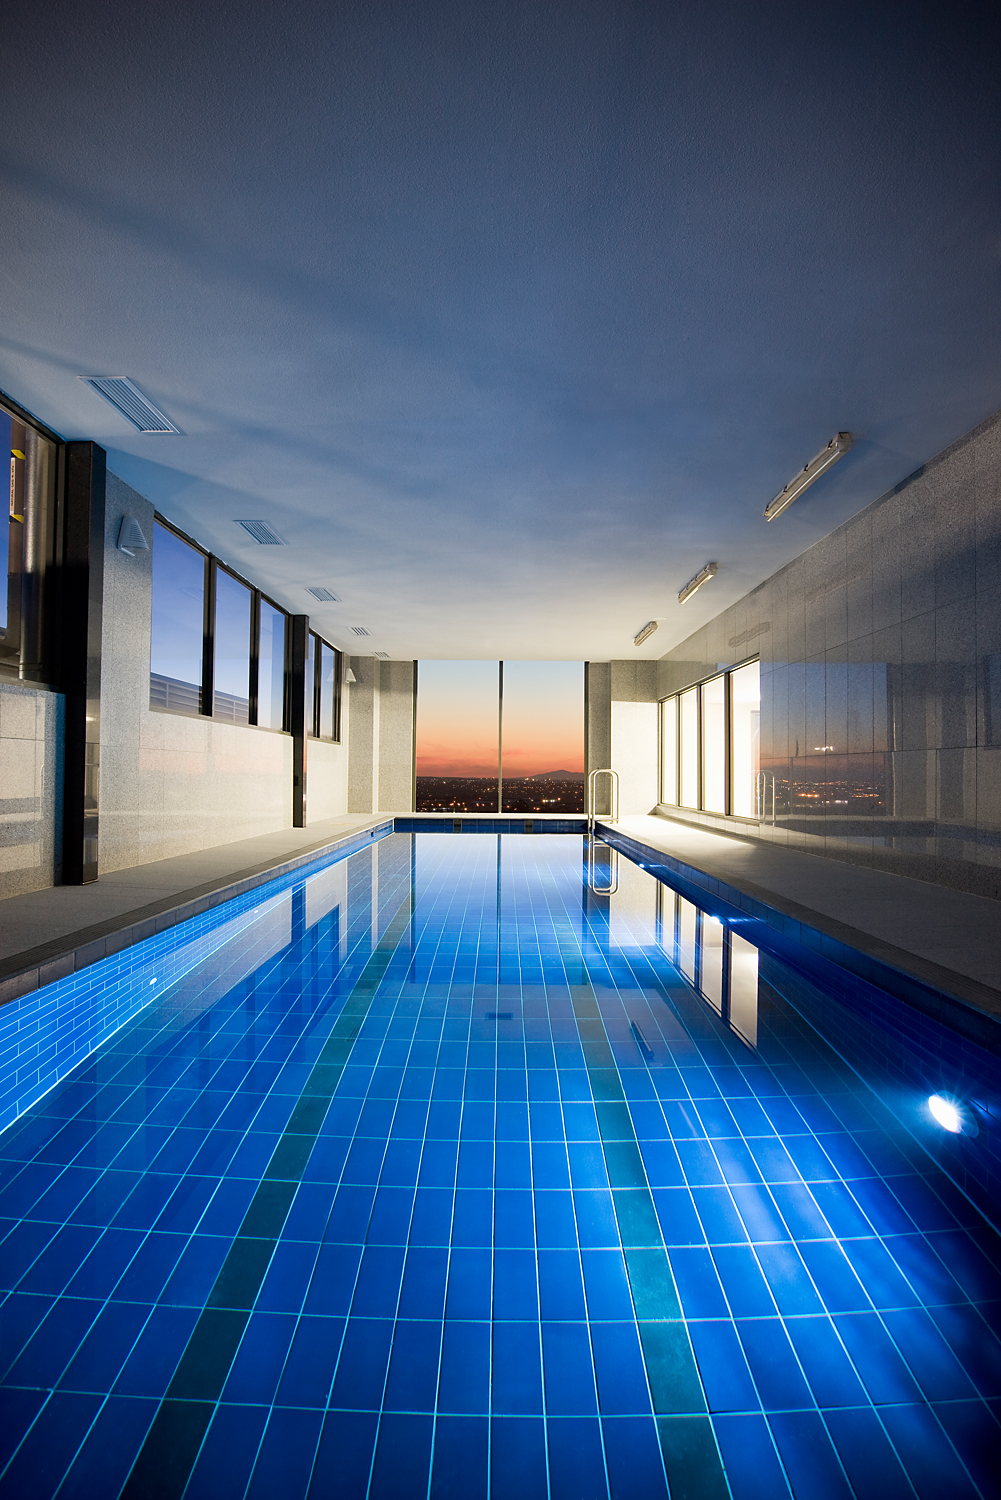 Mantra Melbourne Airport - Swimming pool at dusk